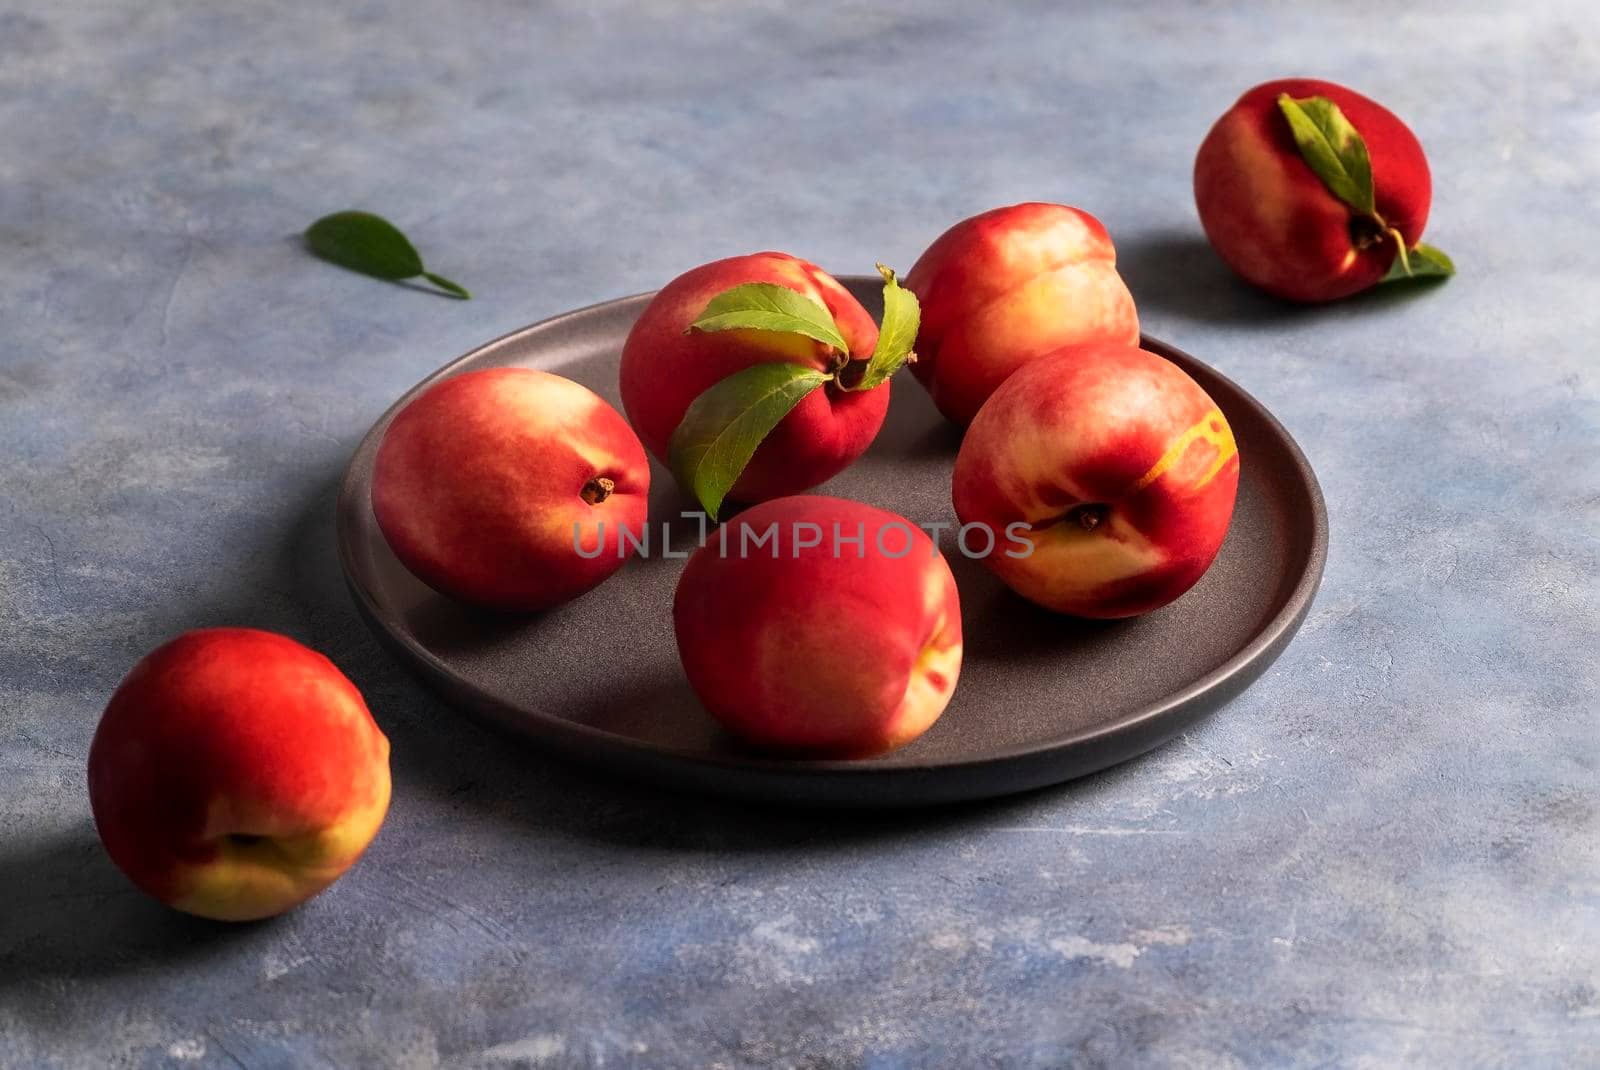 Several ripe peaches or nectarines lie on a black ceramic plate on a blue plaster-textured surface. Selective focus.